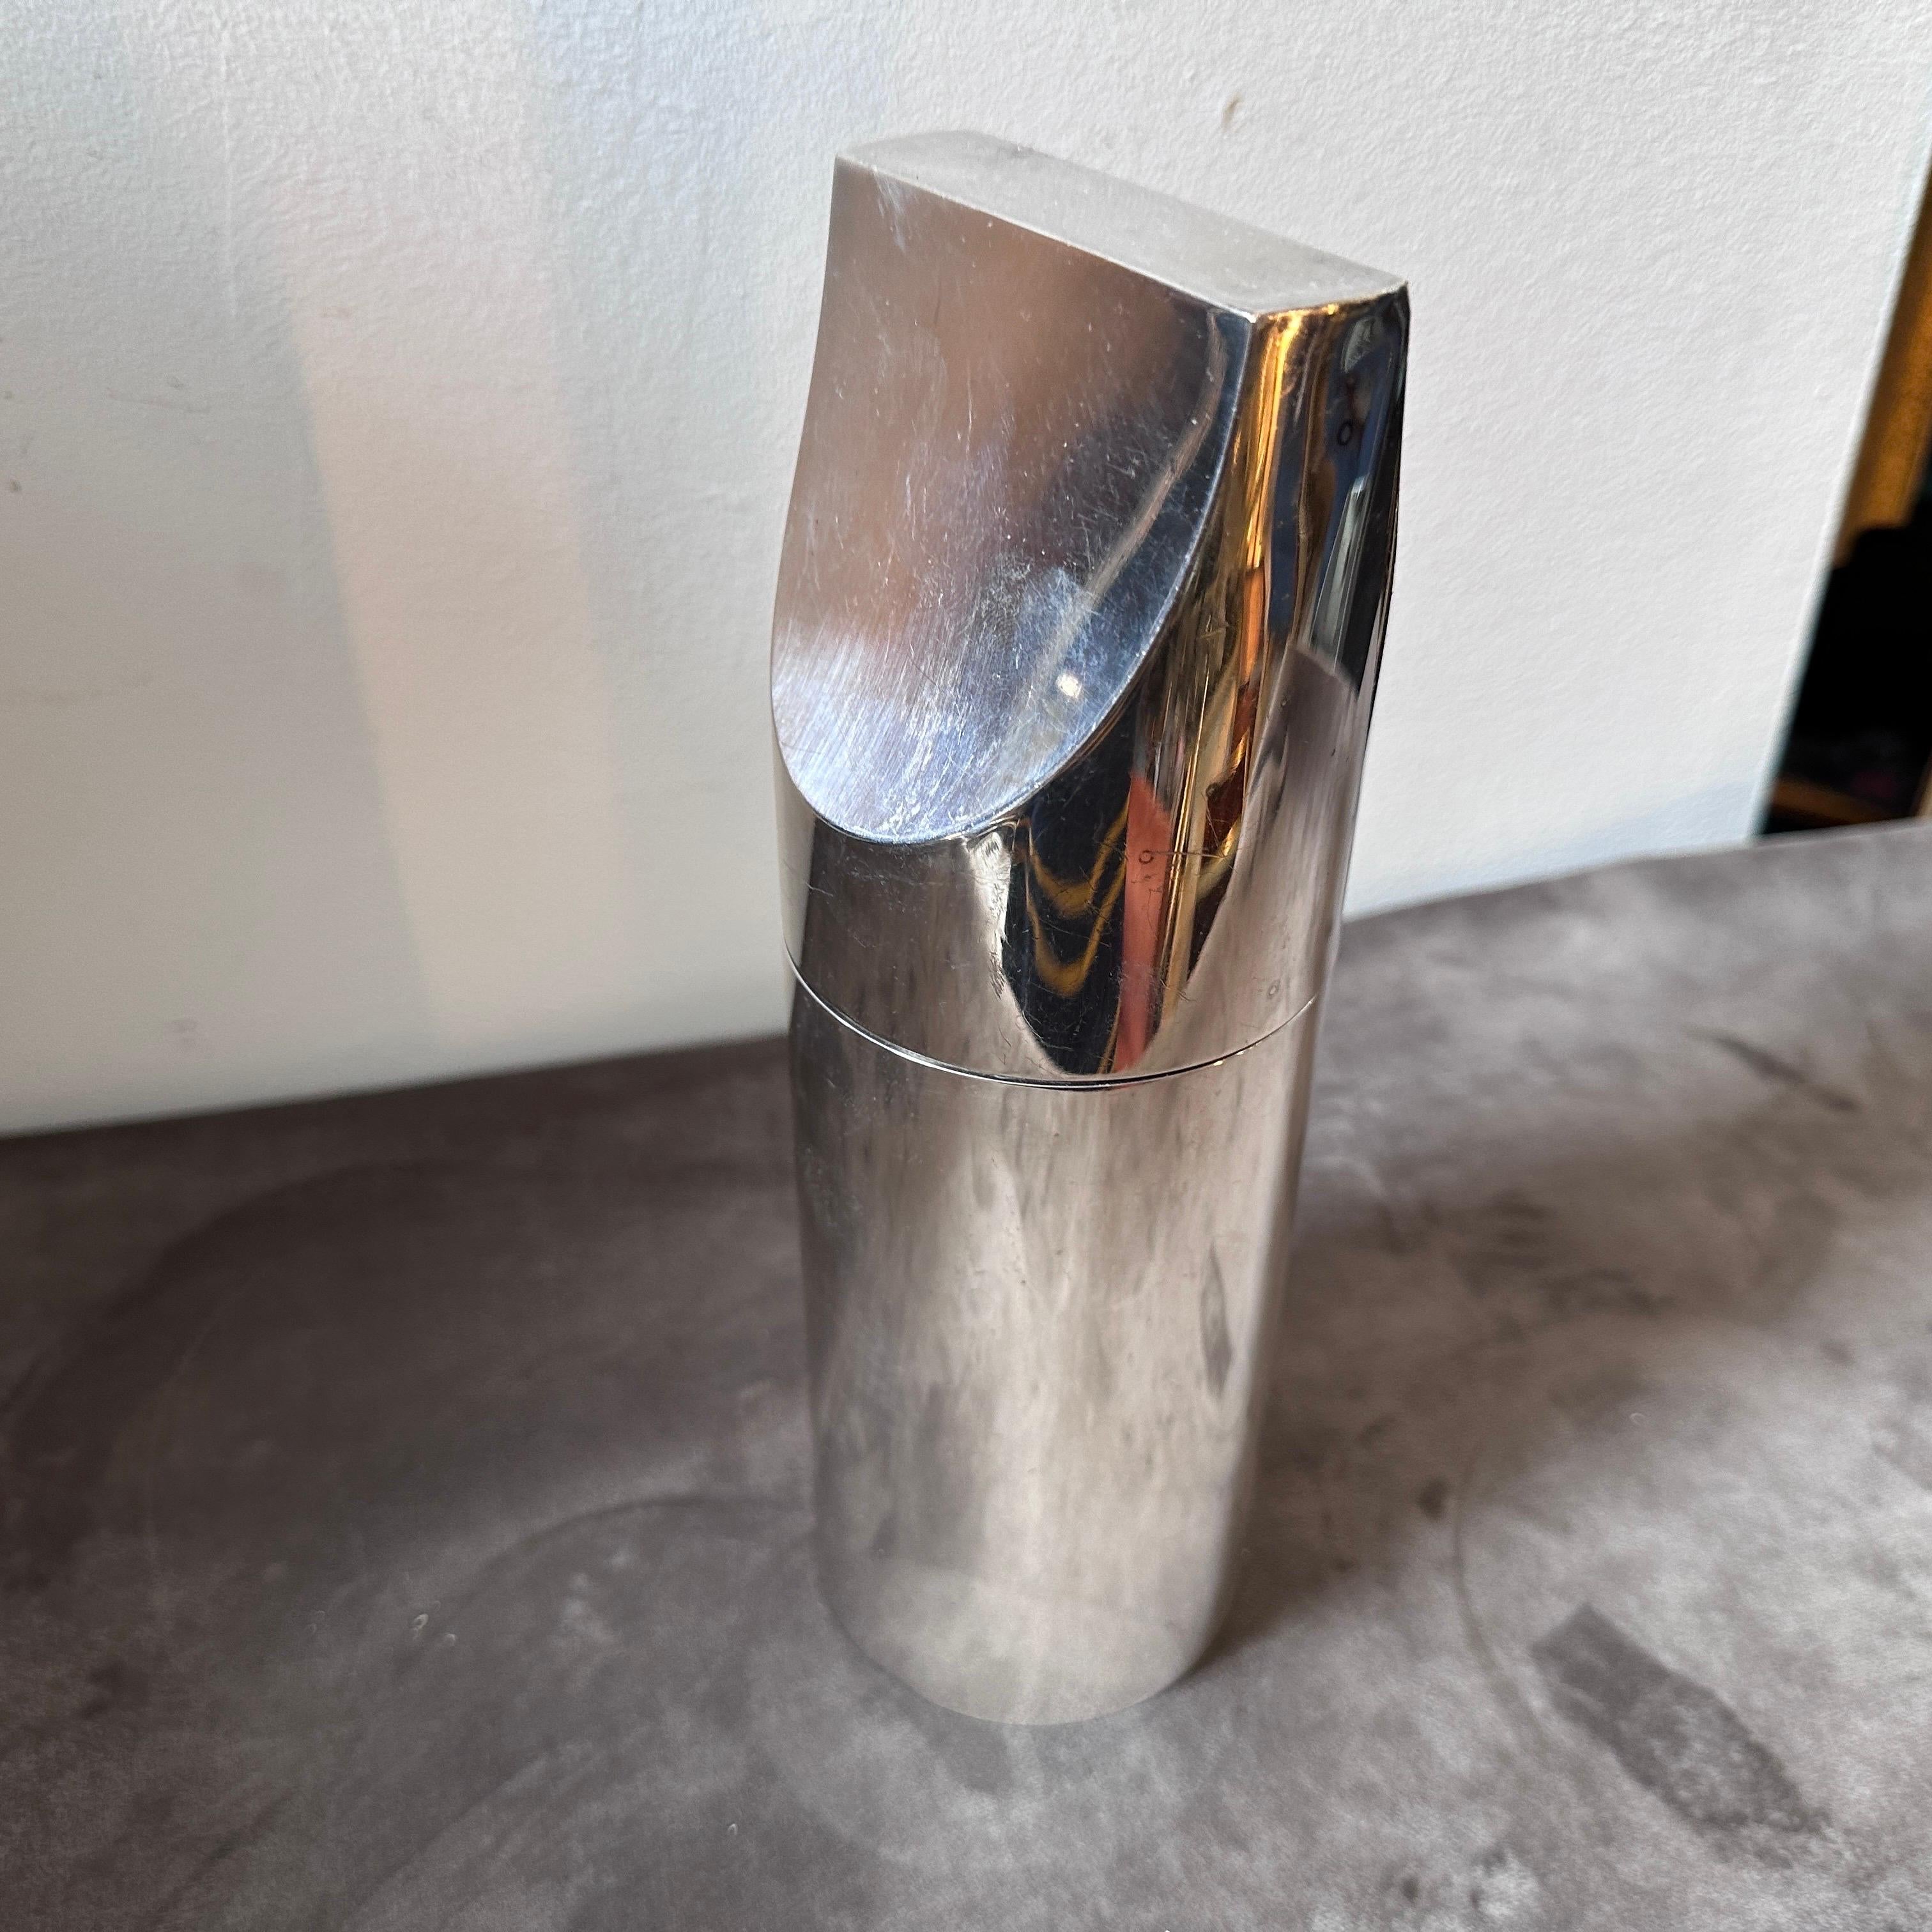 An iconic silver plated shaker designed by Lino Sabattini in the Eighties, it's marked Sabattini Argenteria on the bottom and it's in good conditions overall with normal signs of use and age. This Shaker is a notable example of design from the